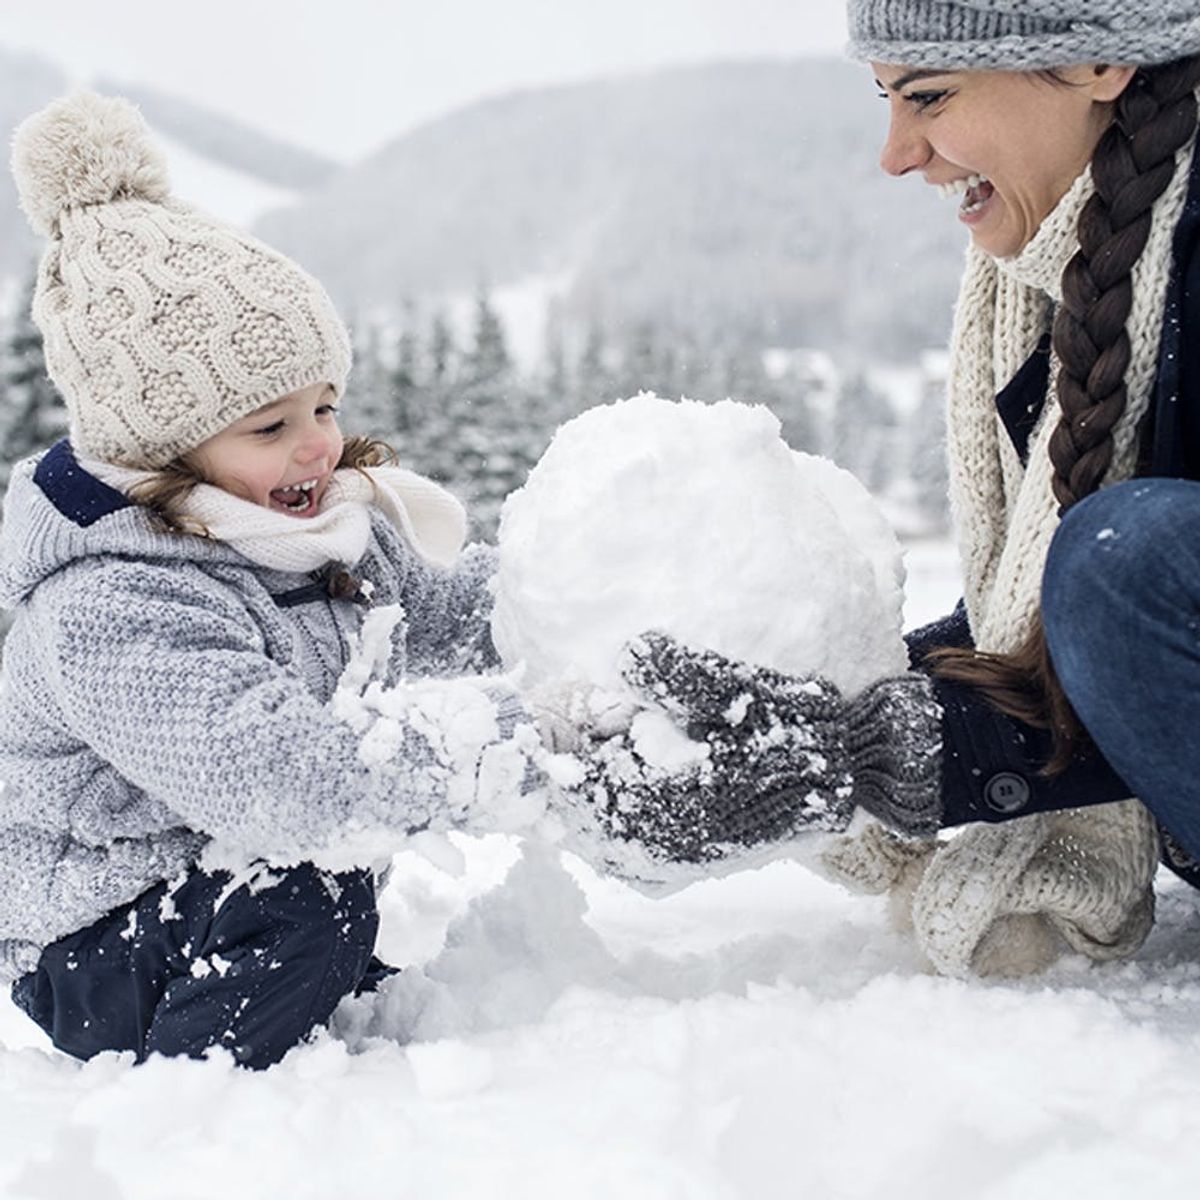 Snow Day? What to Do When Daycare Closes